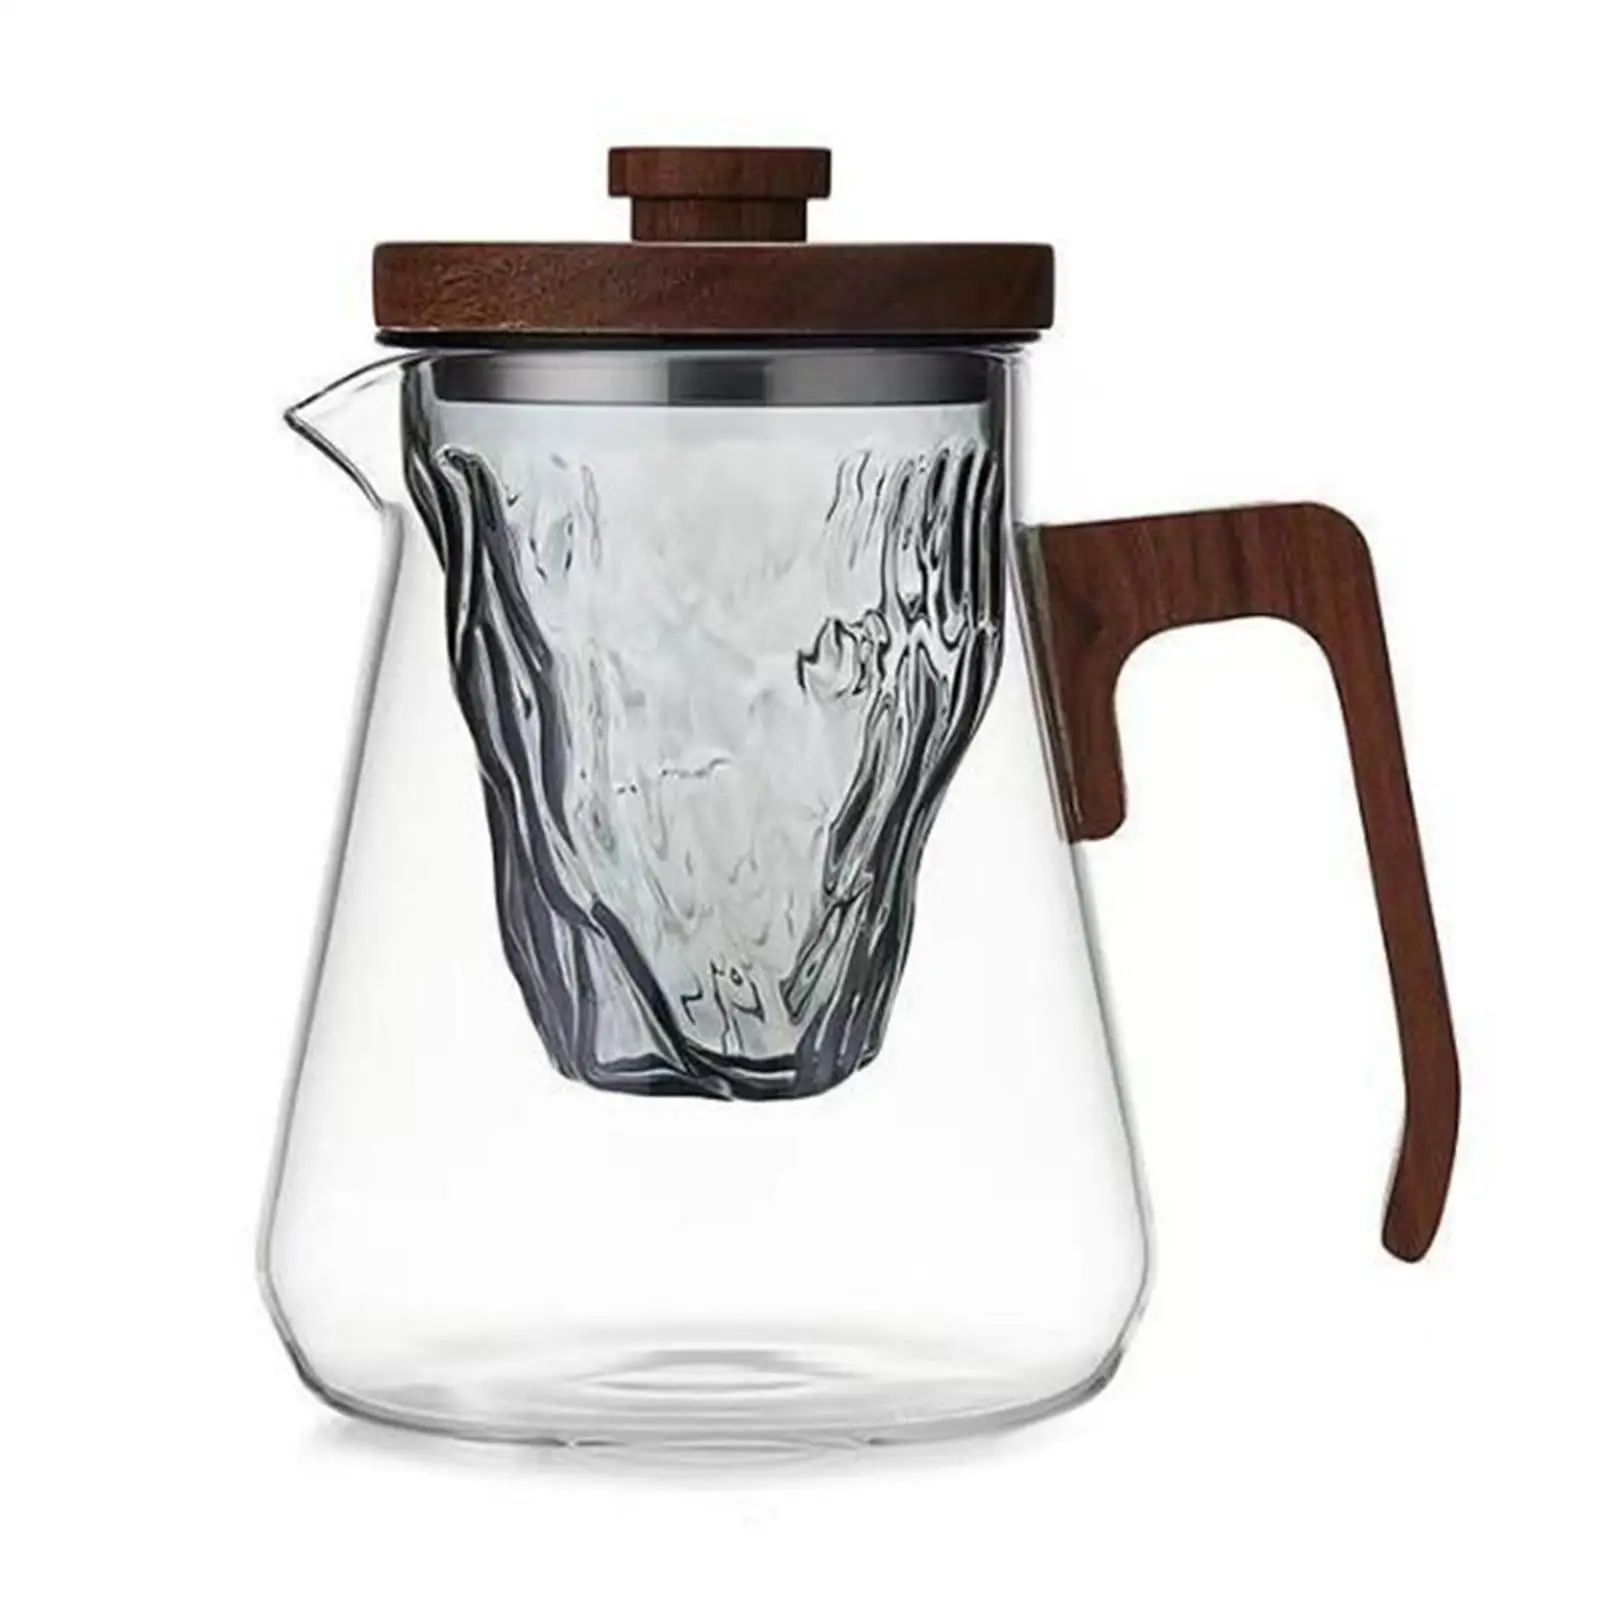 700ml Glass Tea Kettle with Infuser Large Capacity Water Pot for Household Table Restaurant Kitchen